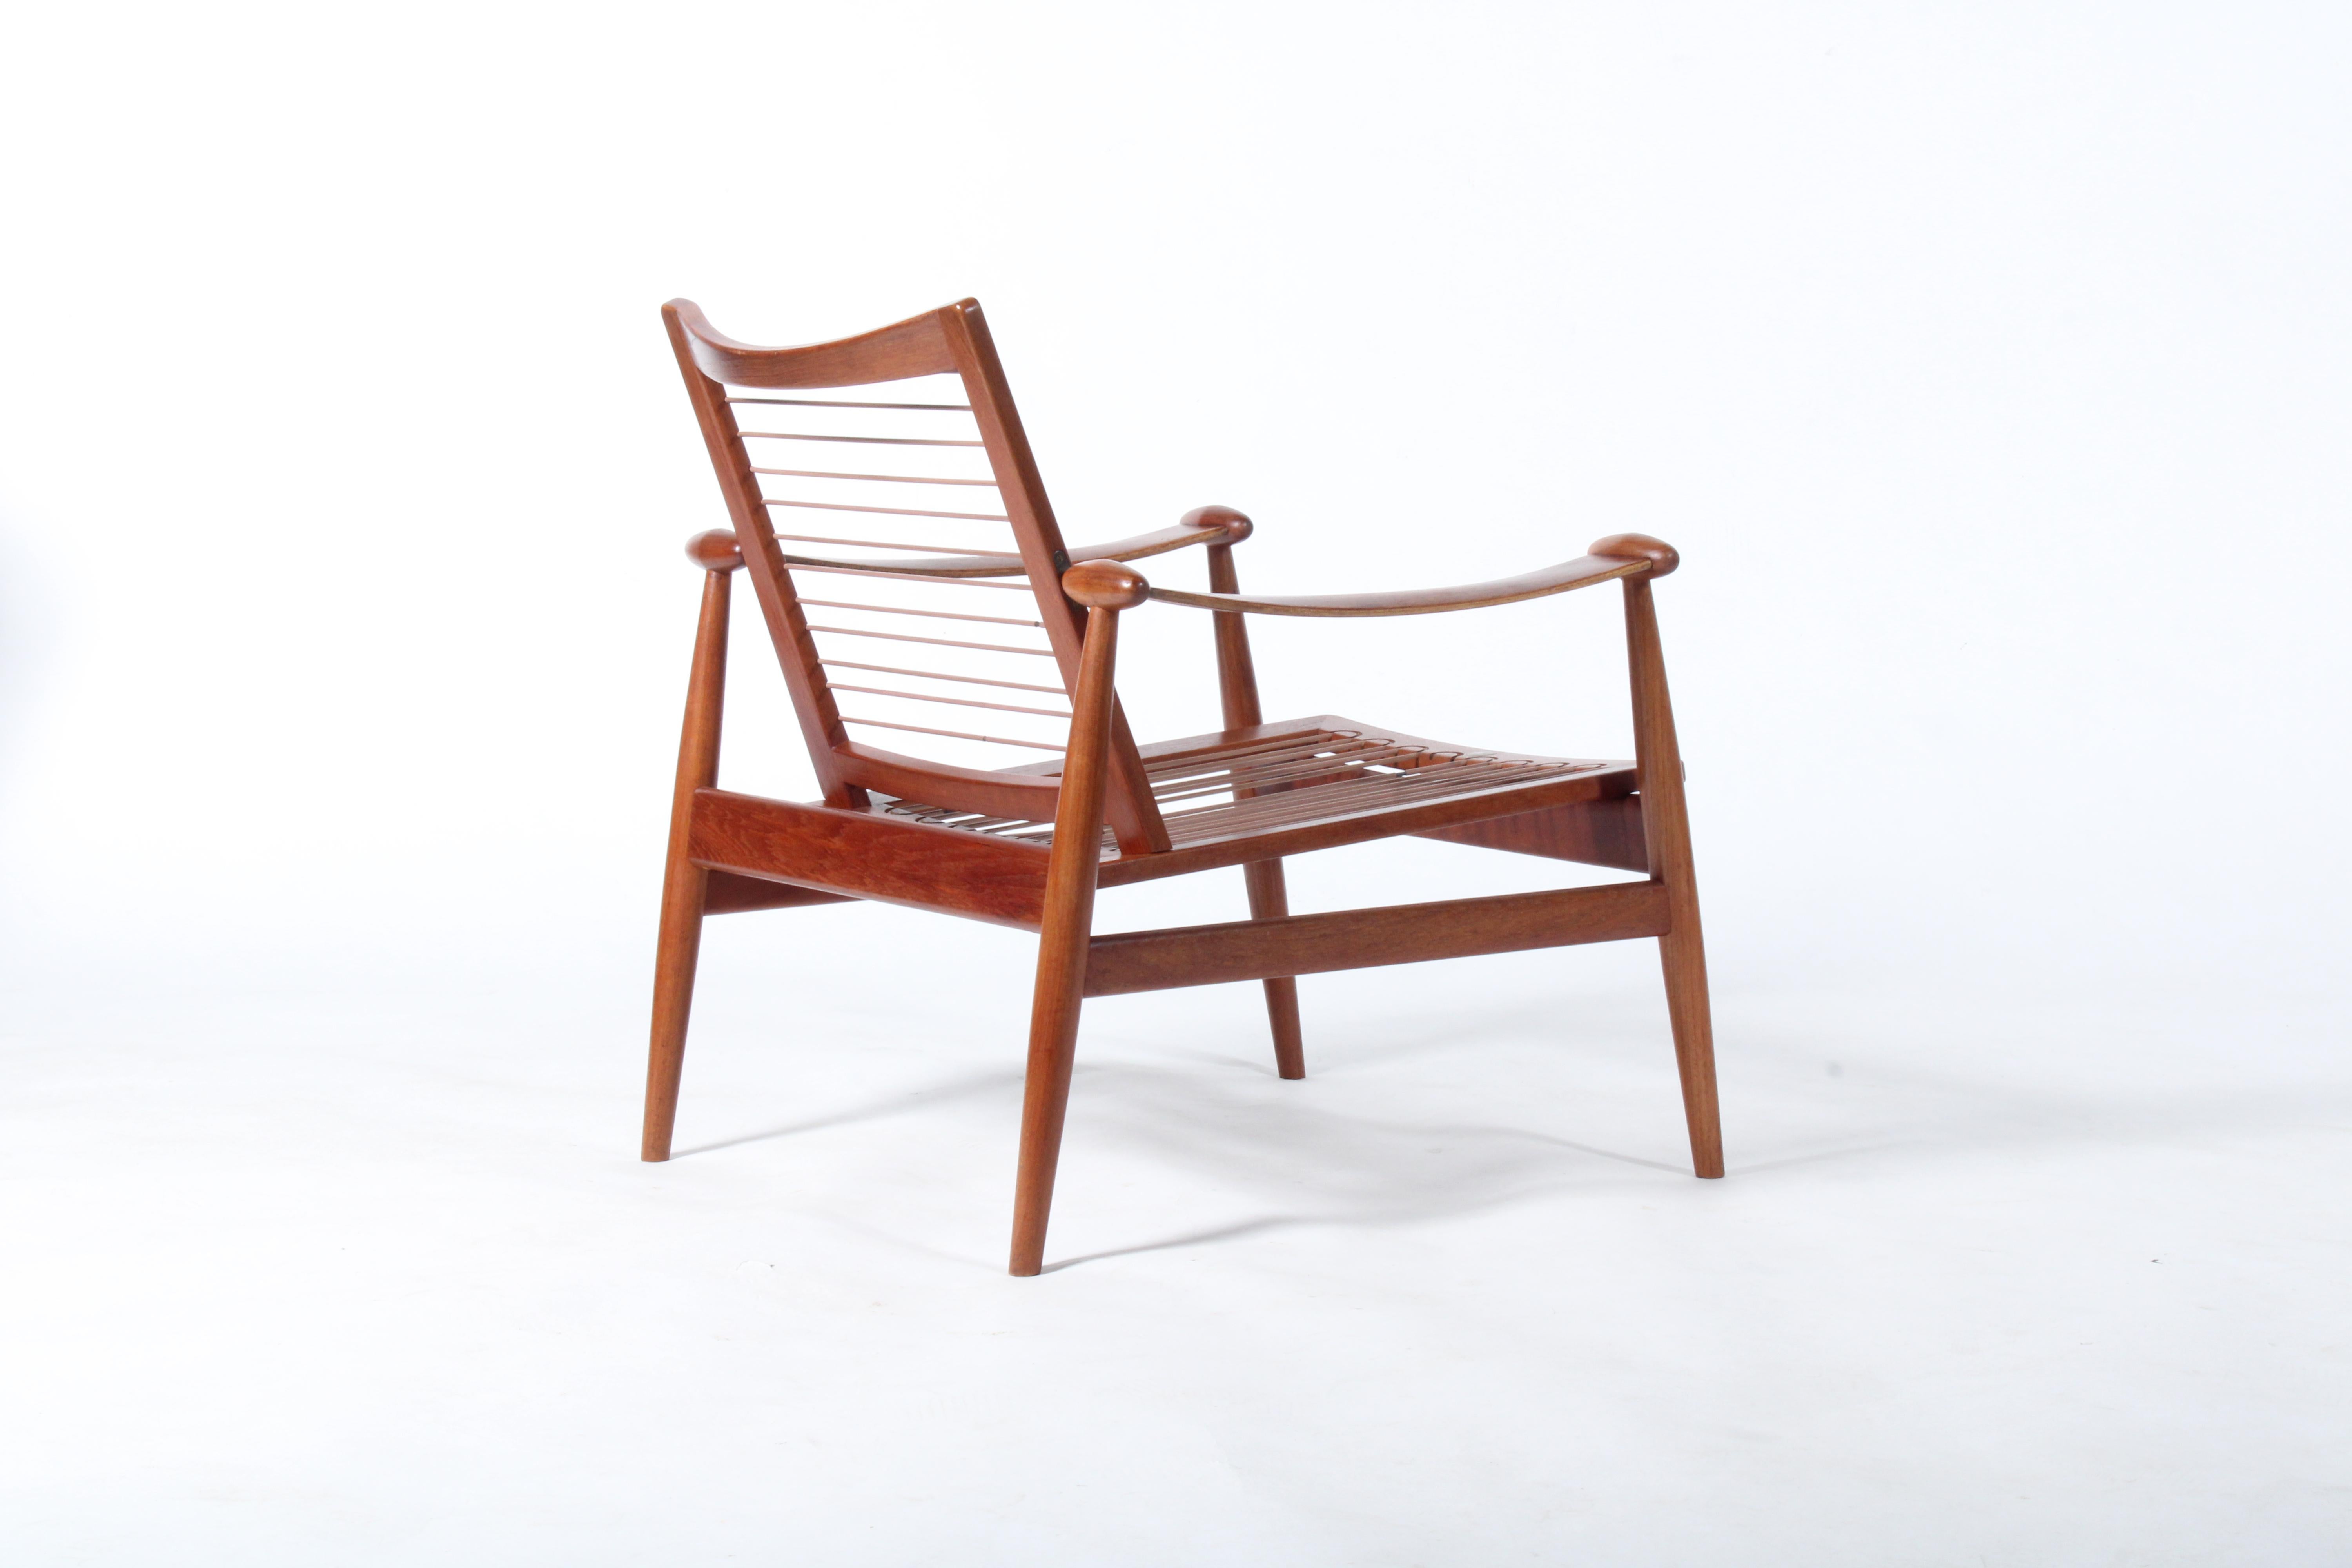 Exquisite Mid Century Danish Spade Chair By Finn Juhl For France & Son In Teak For Sale 6